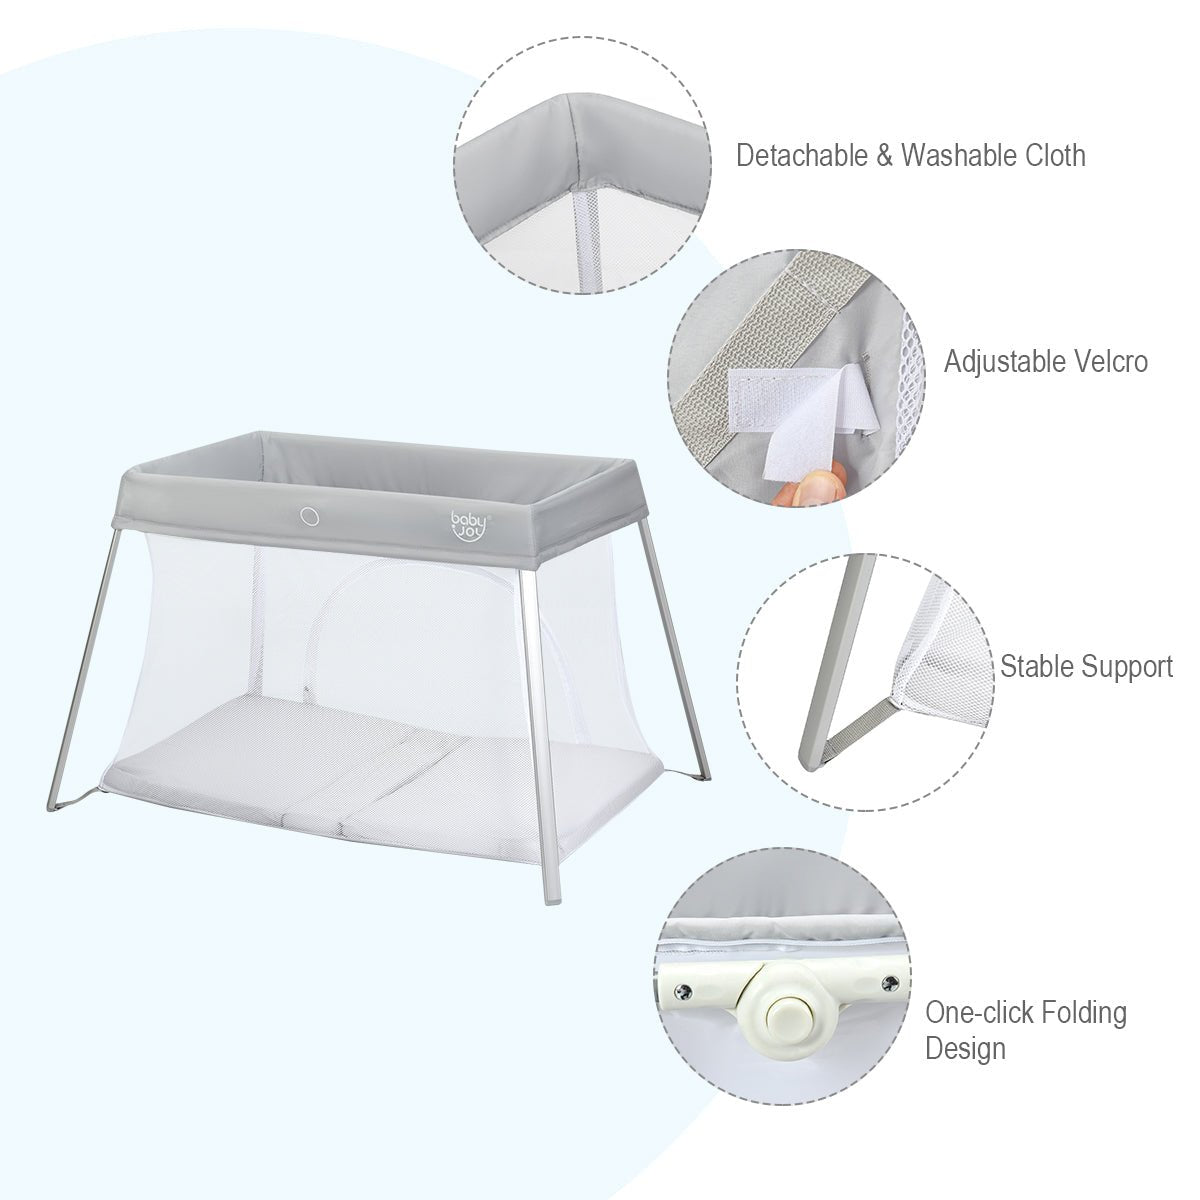 Portable Baby Crib: Easy Travel Solution in Silver